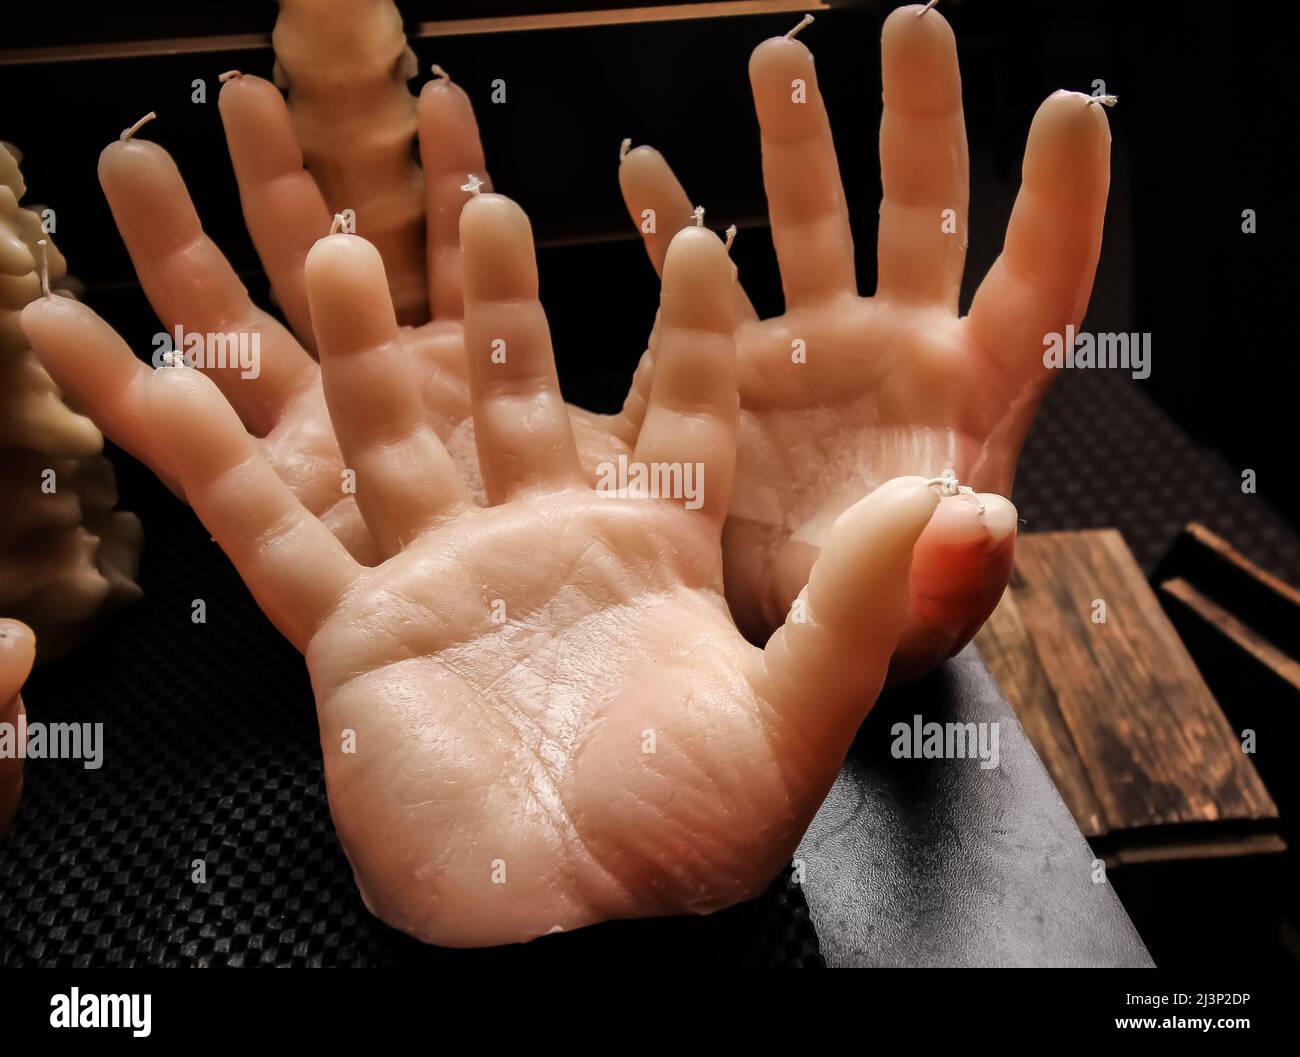 Display Of Human Hands With Wicks At End Of Finders Stock Photo